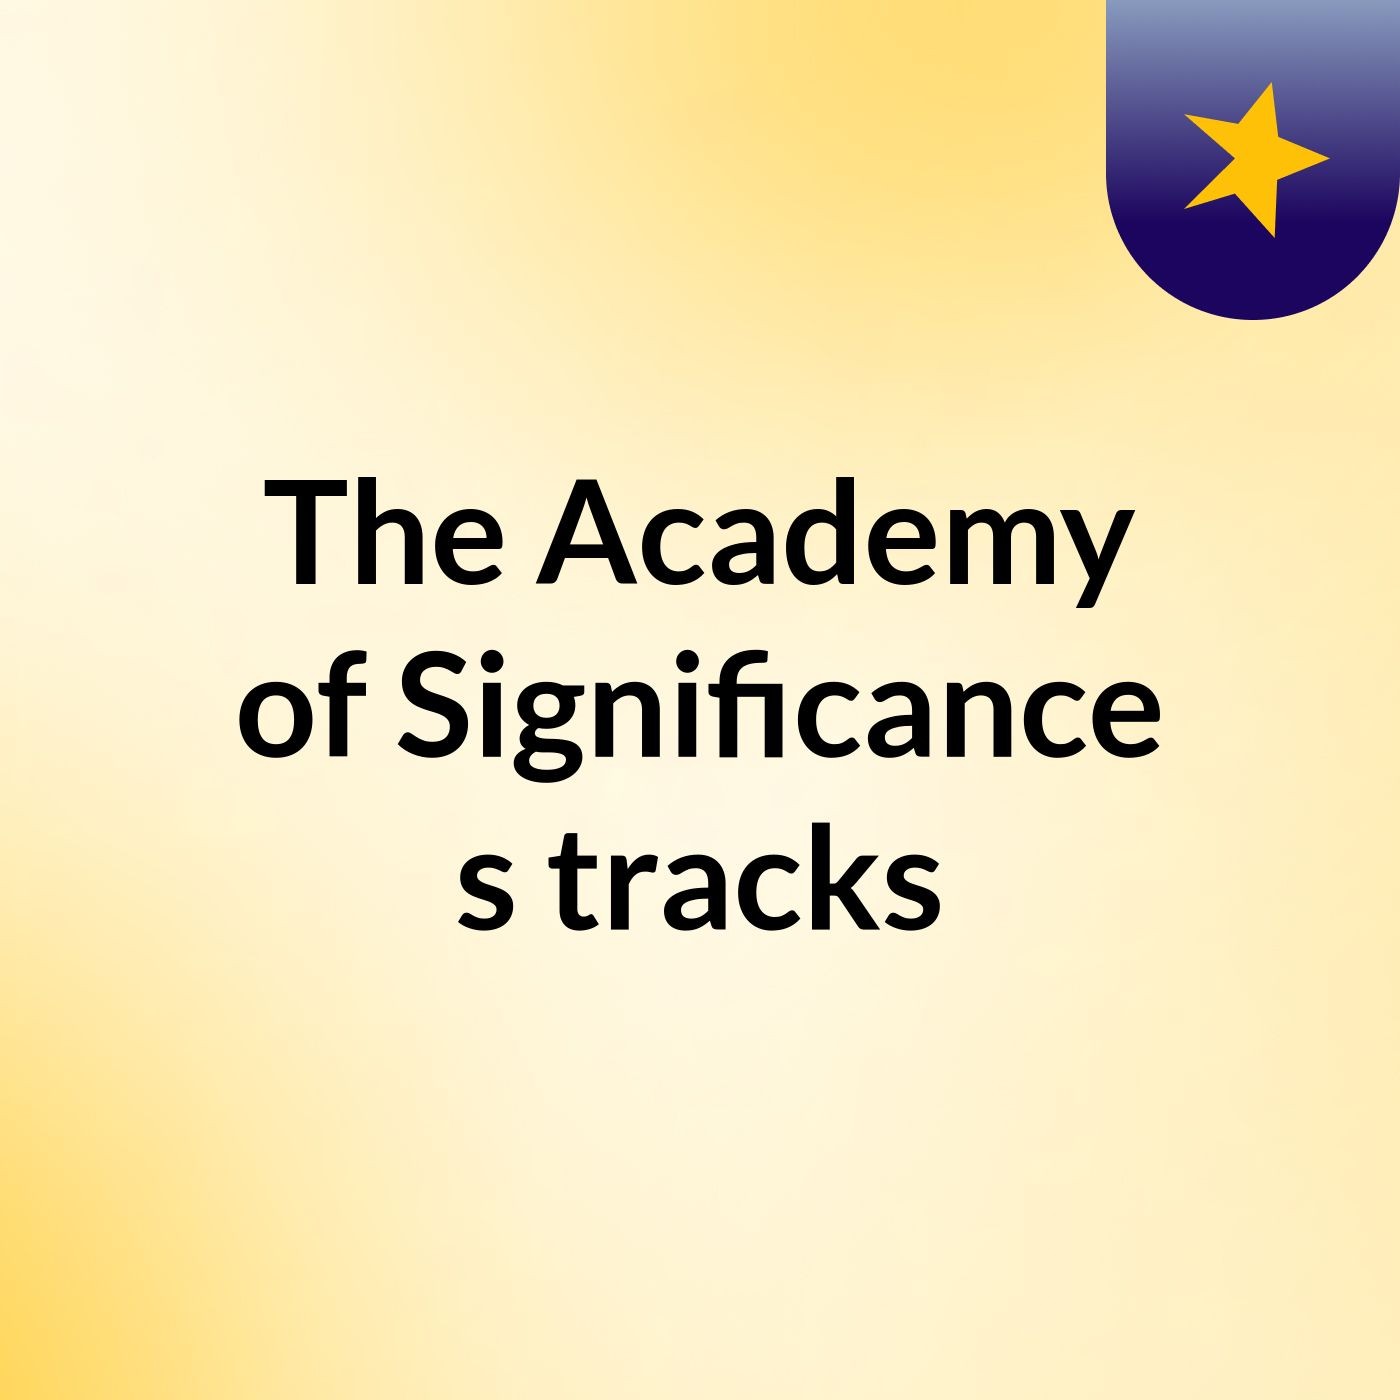 The Academy of Significance's tracks